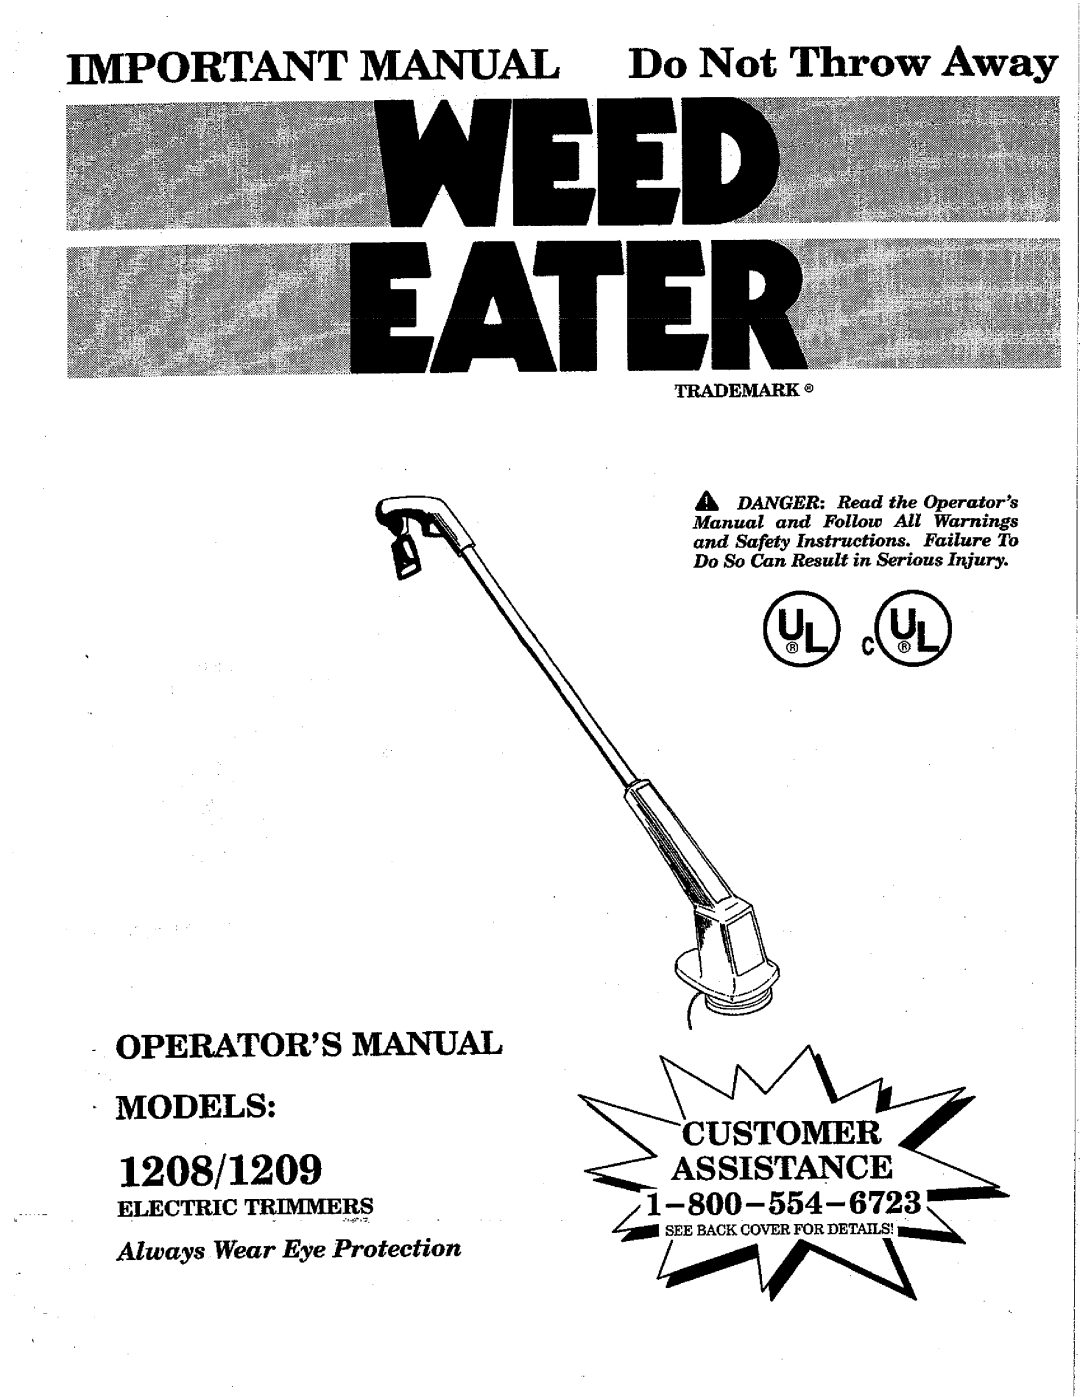 Weed Eater 1209 manual 